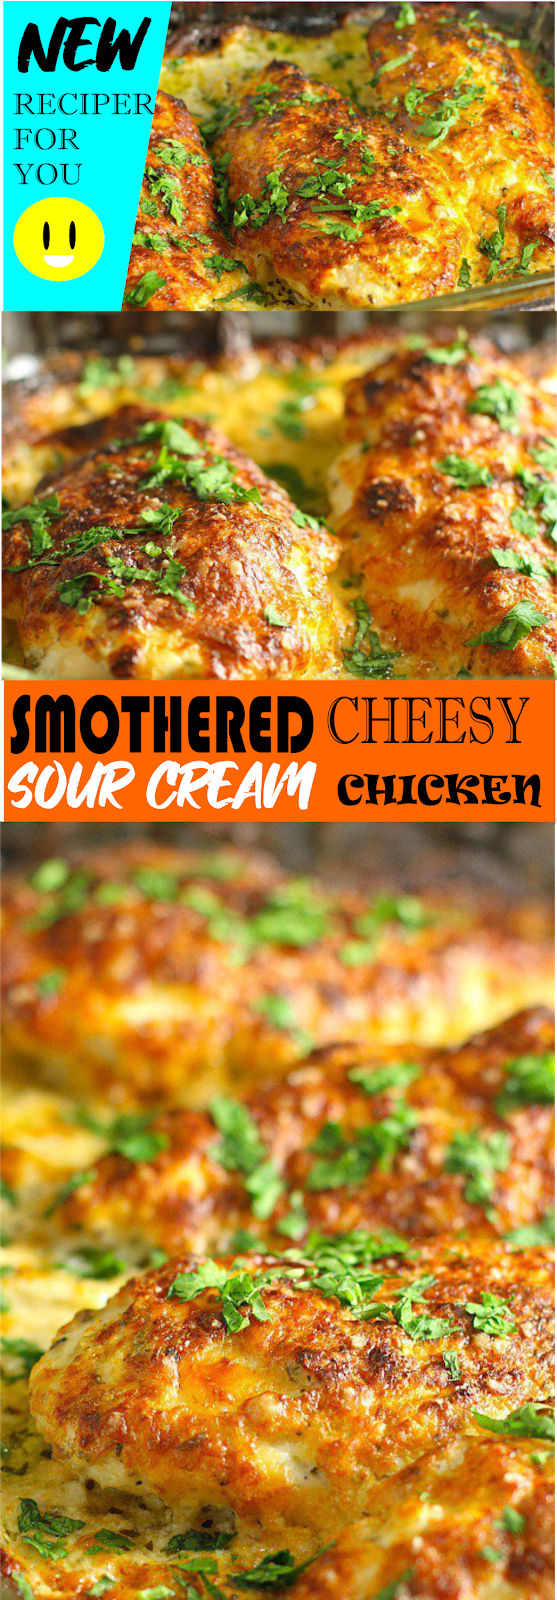 SMOTHERED CHEESY SOUR CREAM CHICKEN | Think food